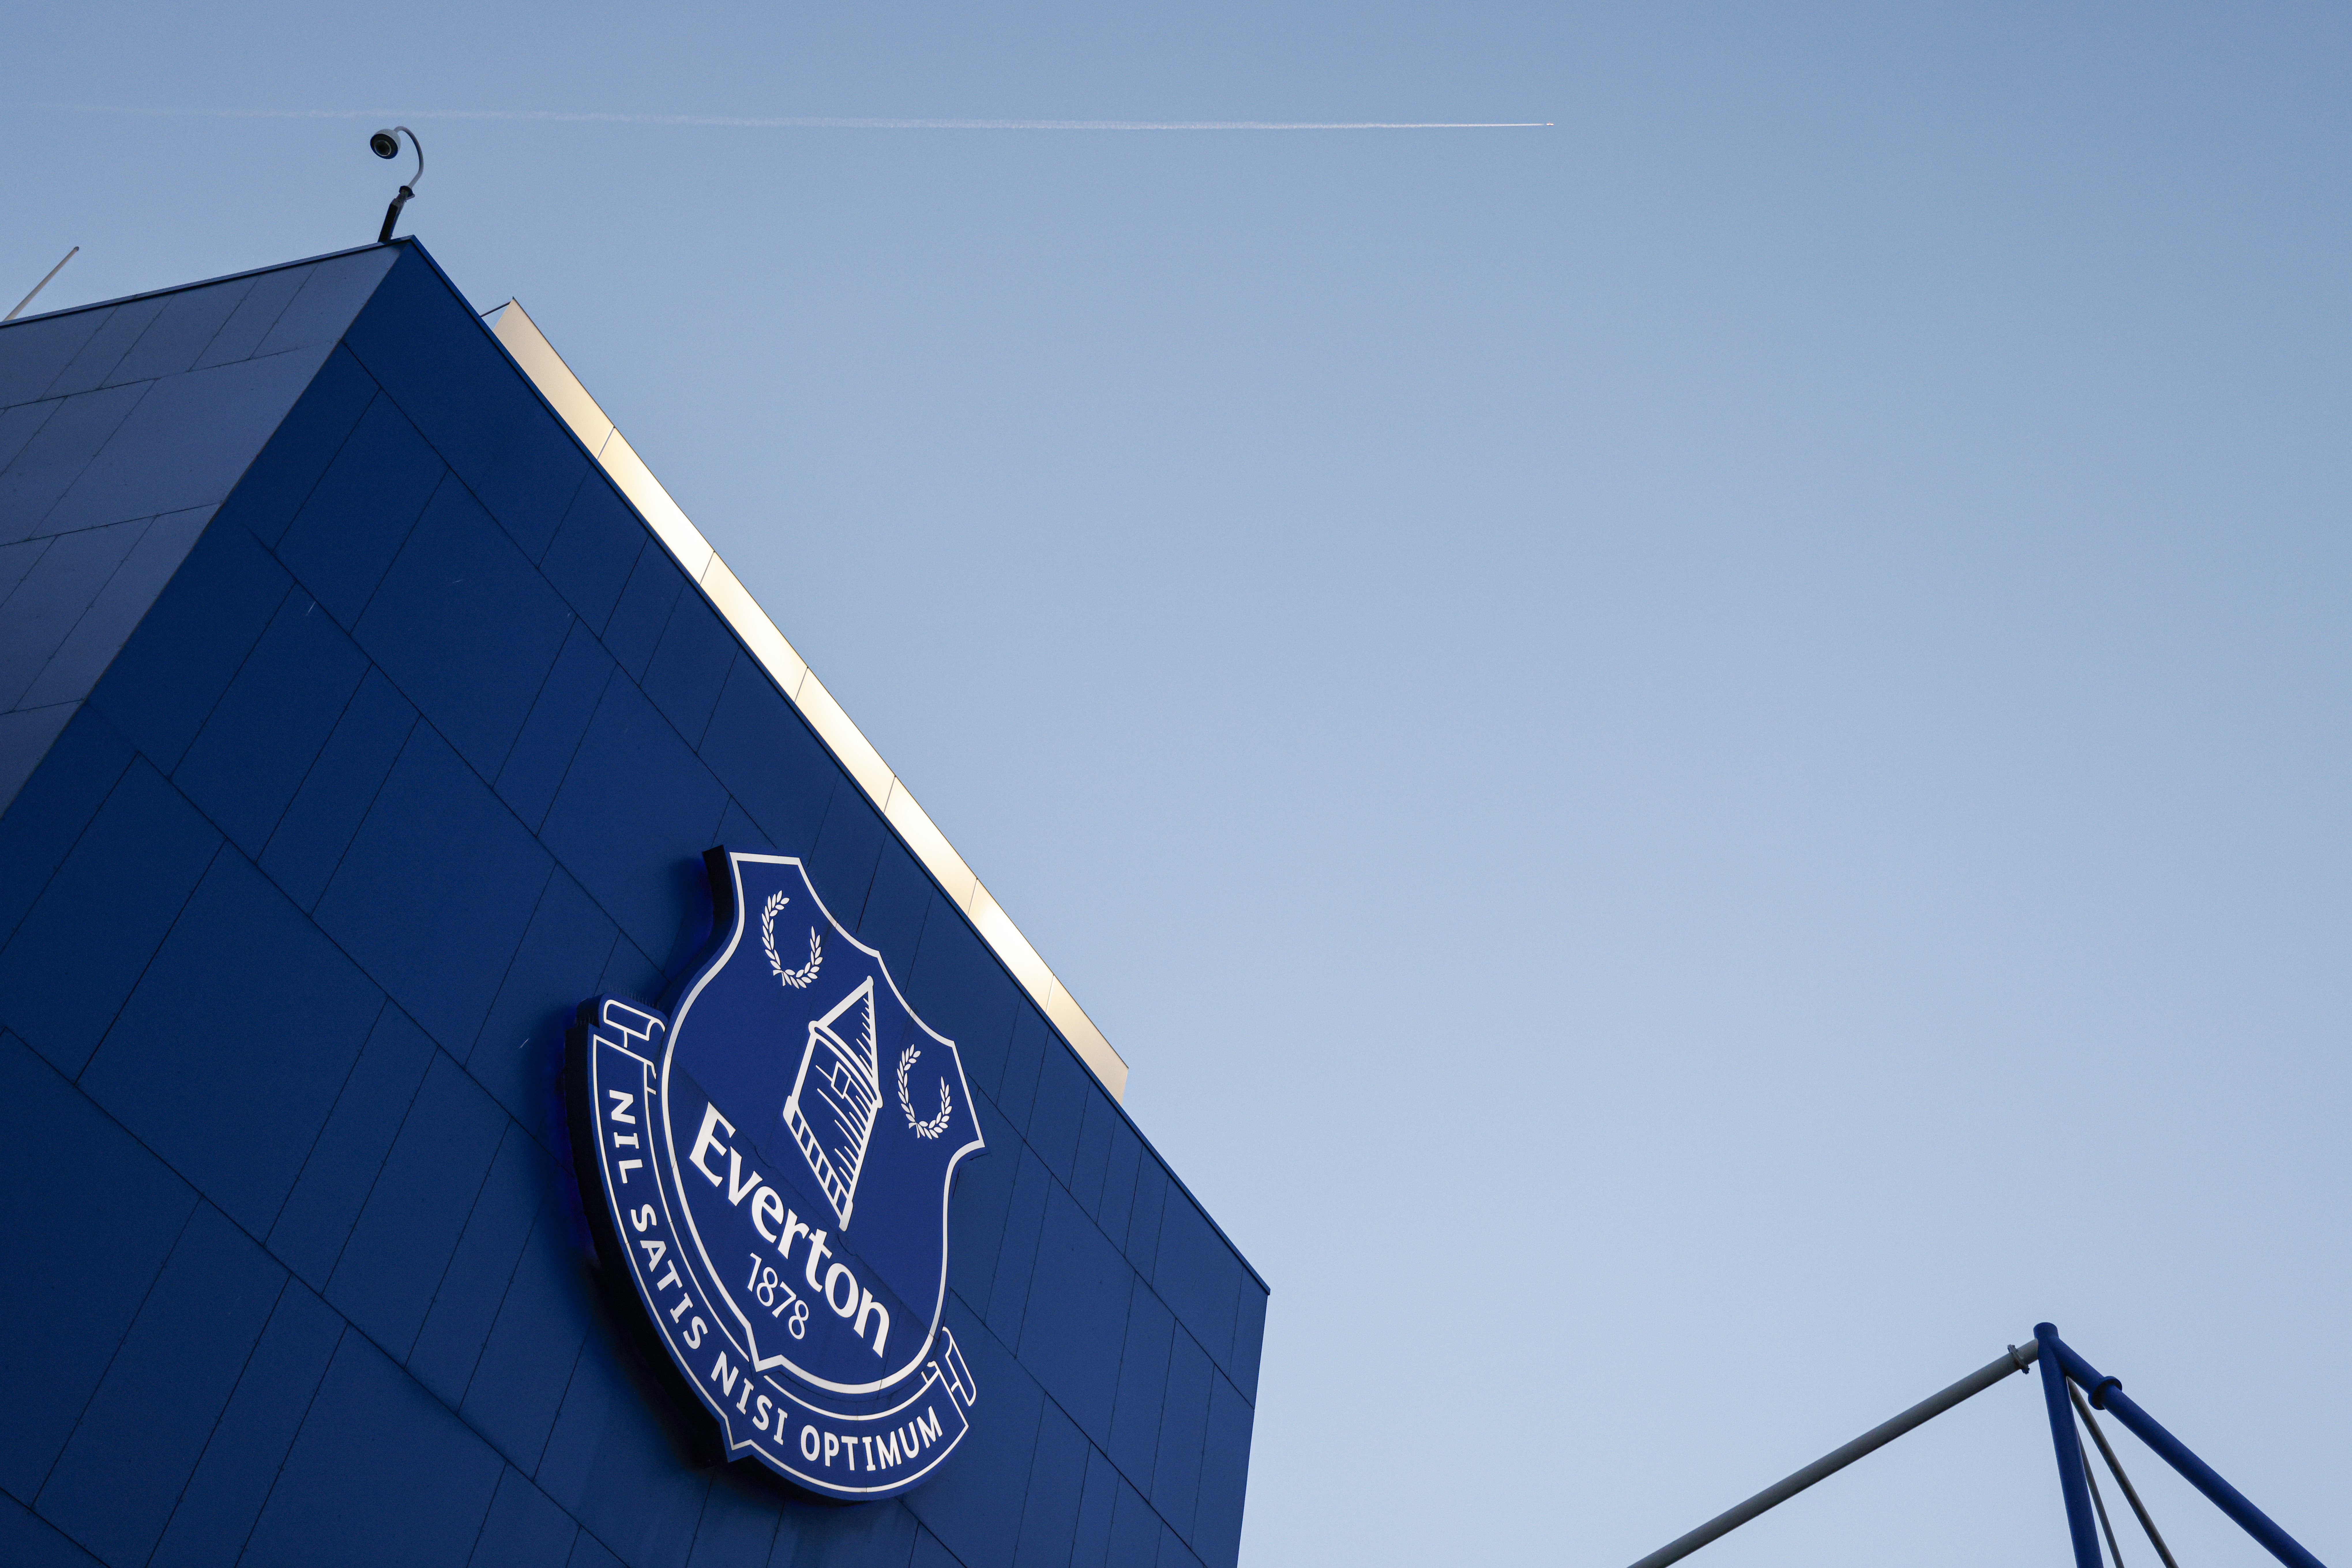 Fan accuses Everton of ‘selling soul of club’ in agreeing betting sponsor deal - NewsChain